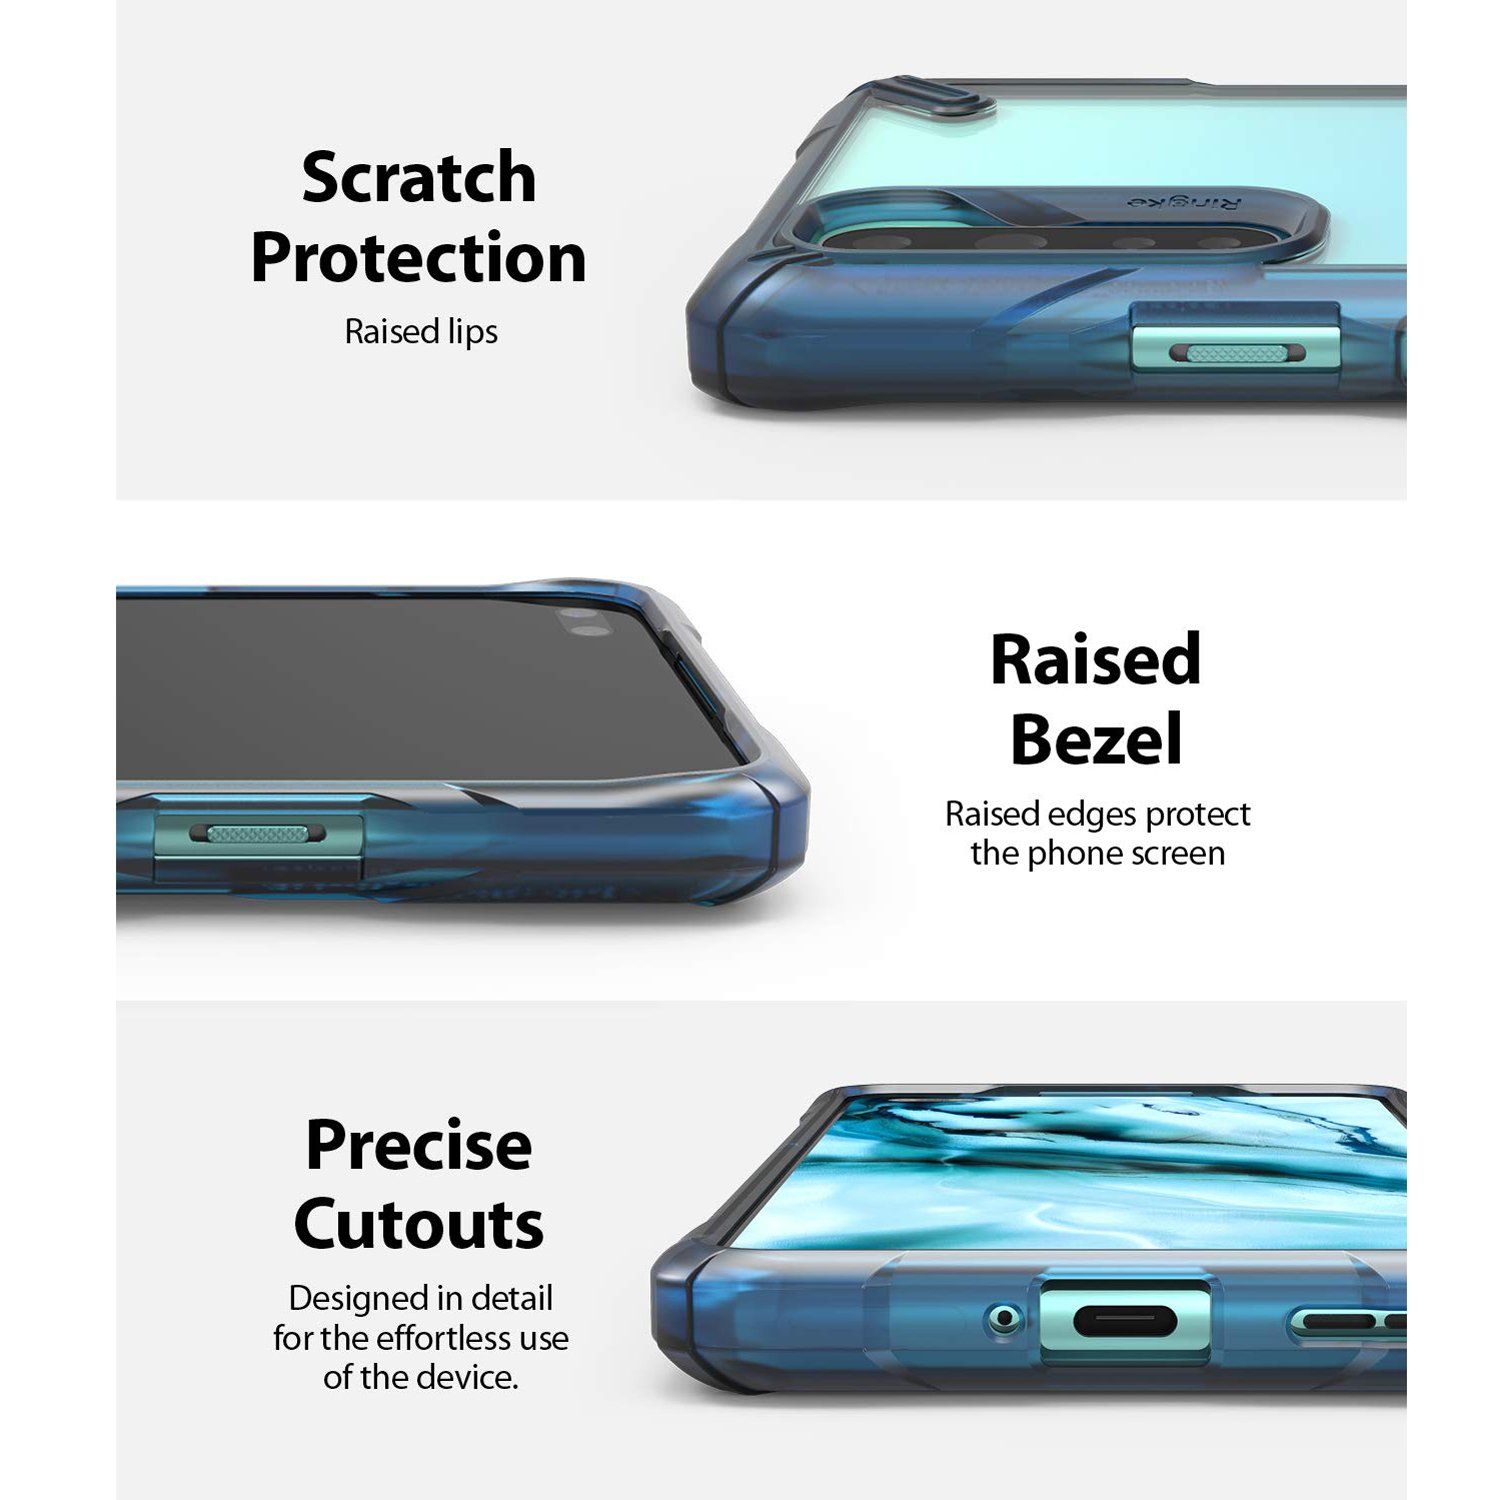 Ringke Fusion X Case for OnePlus Nord, Space Blue Default Ringke 